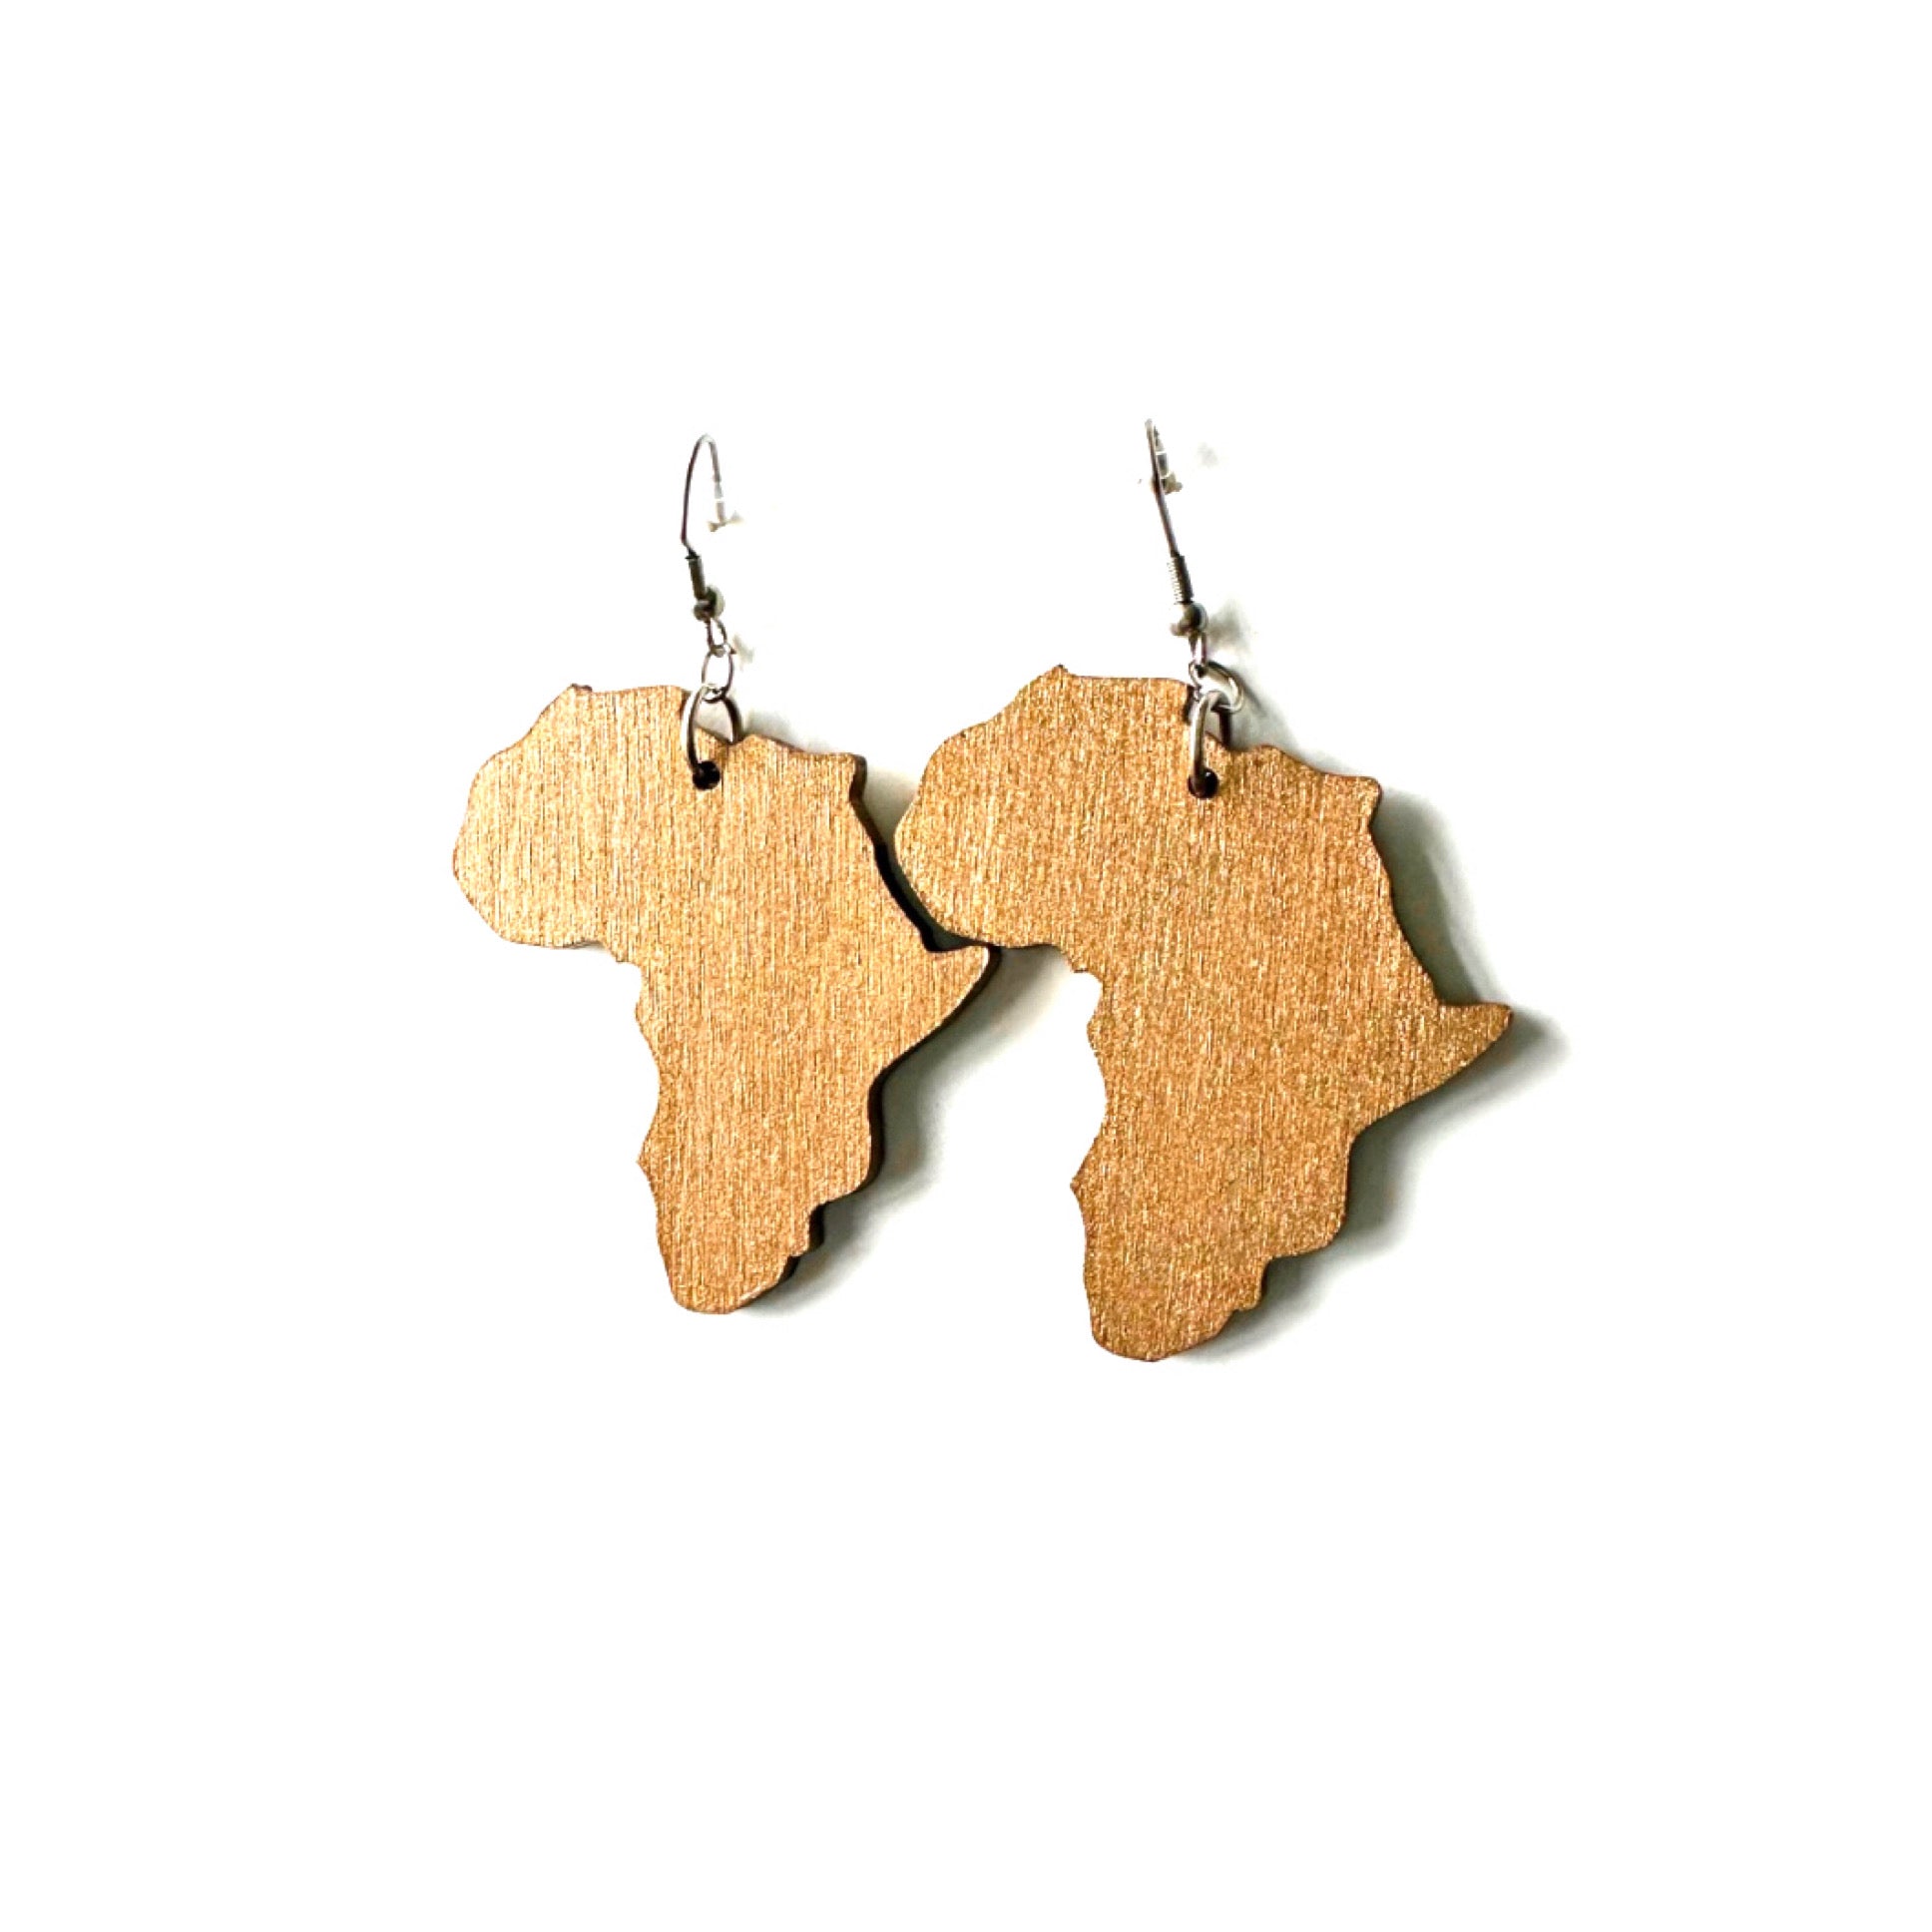 Africa Map Wood Earrings - Cappuccino